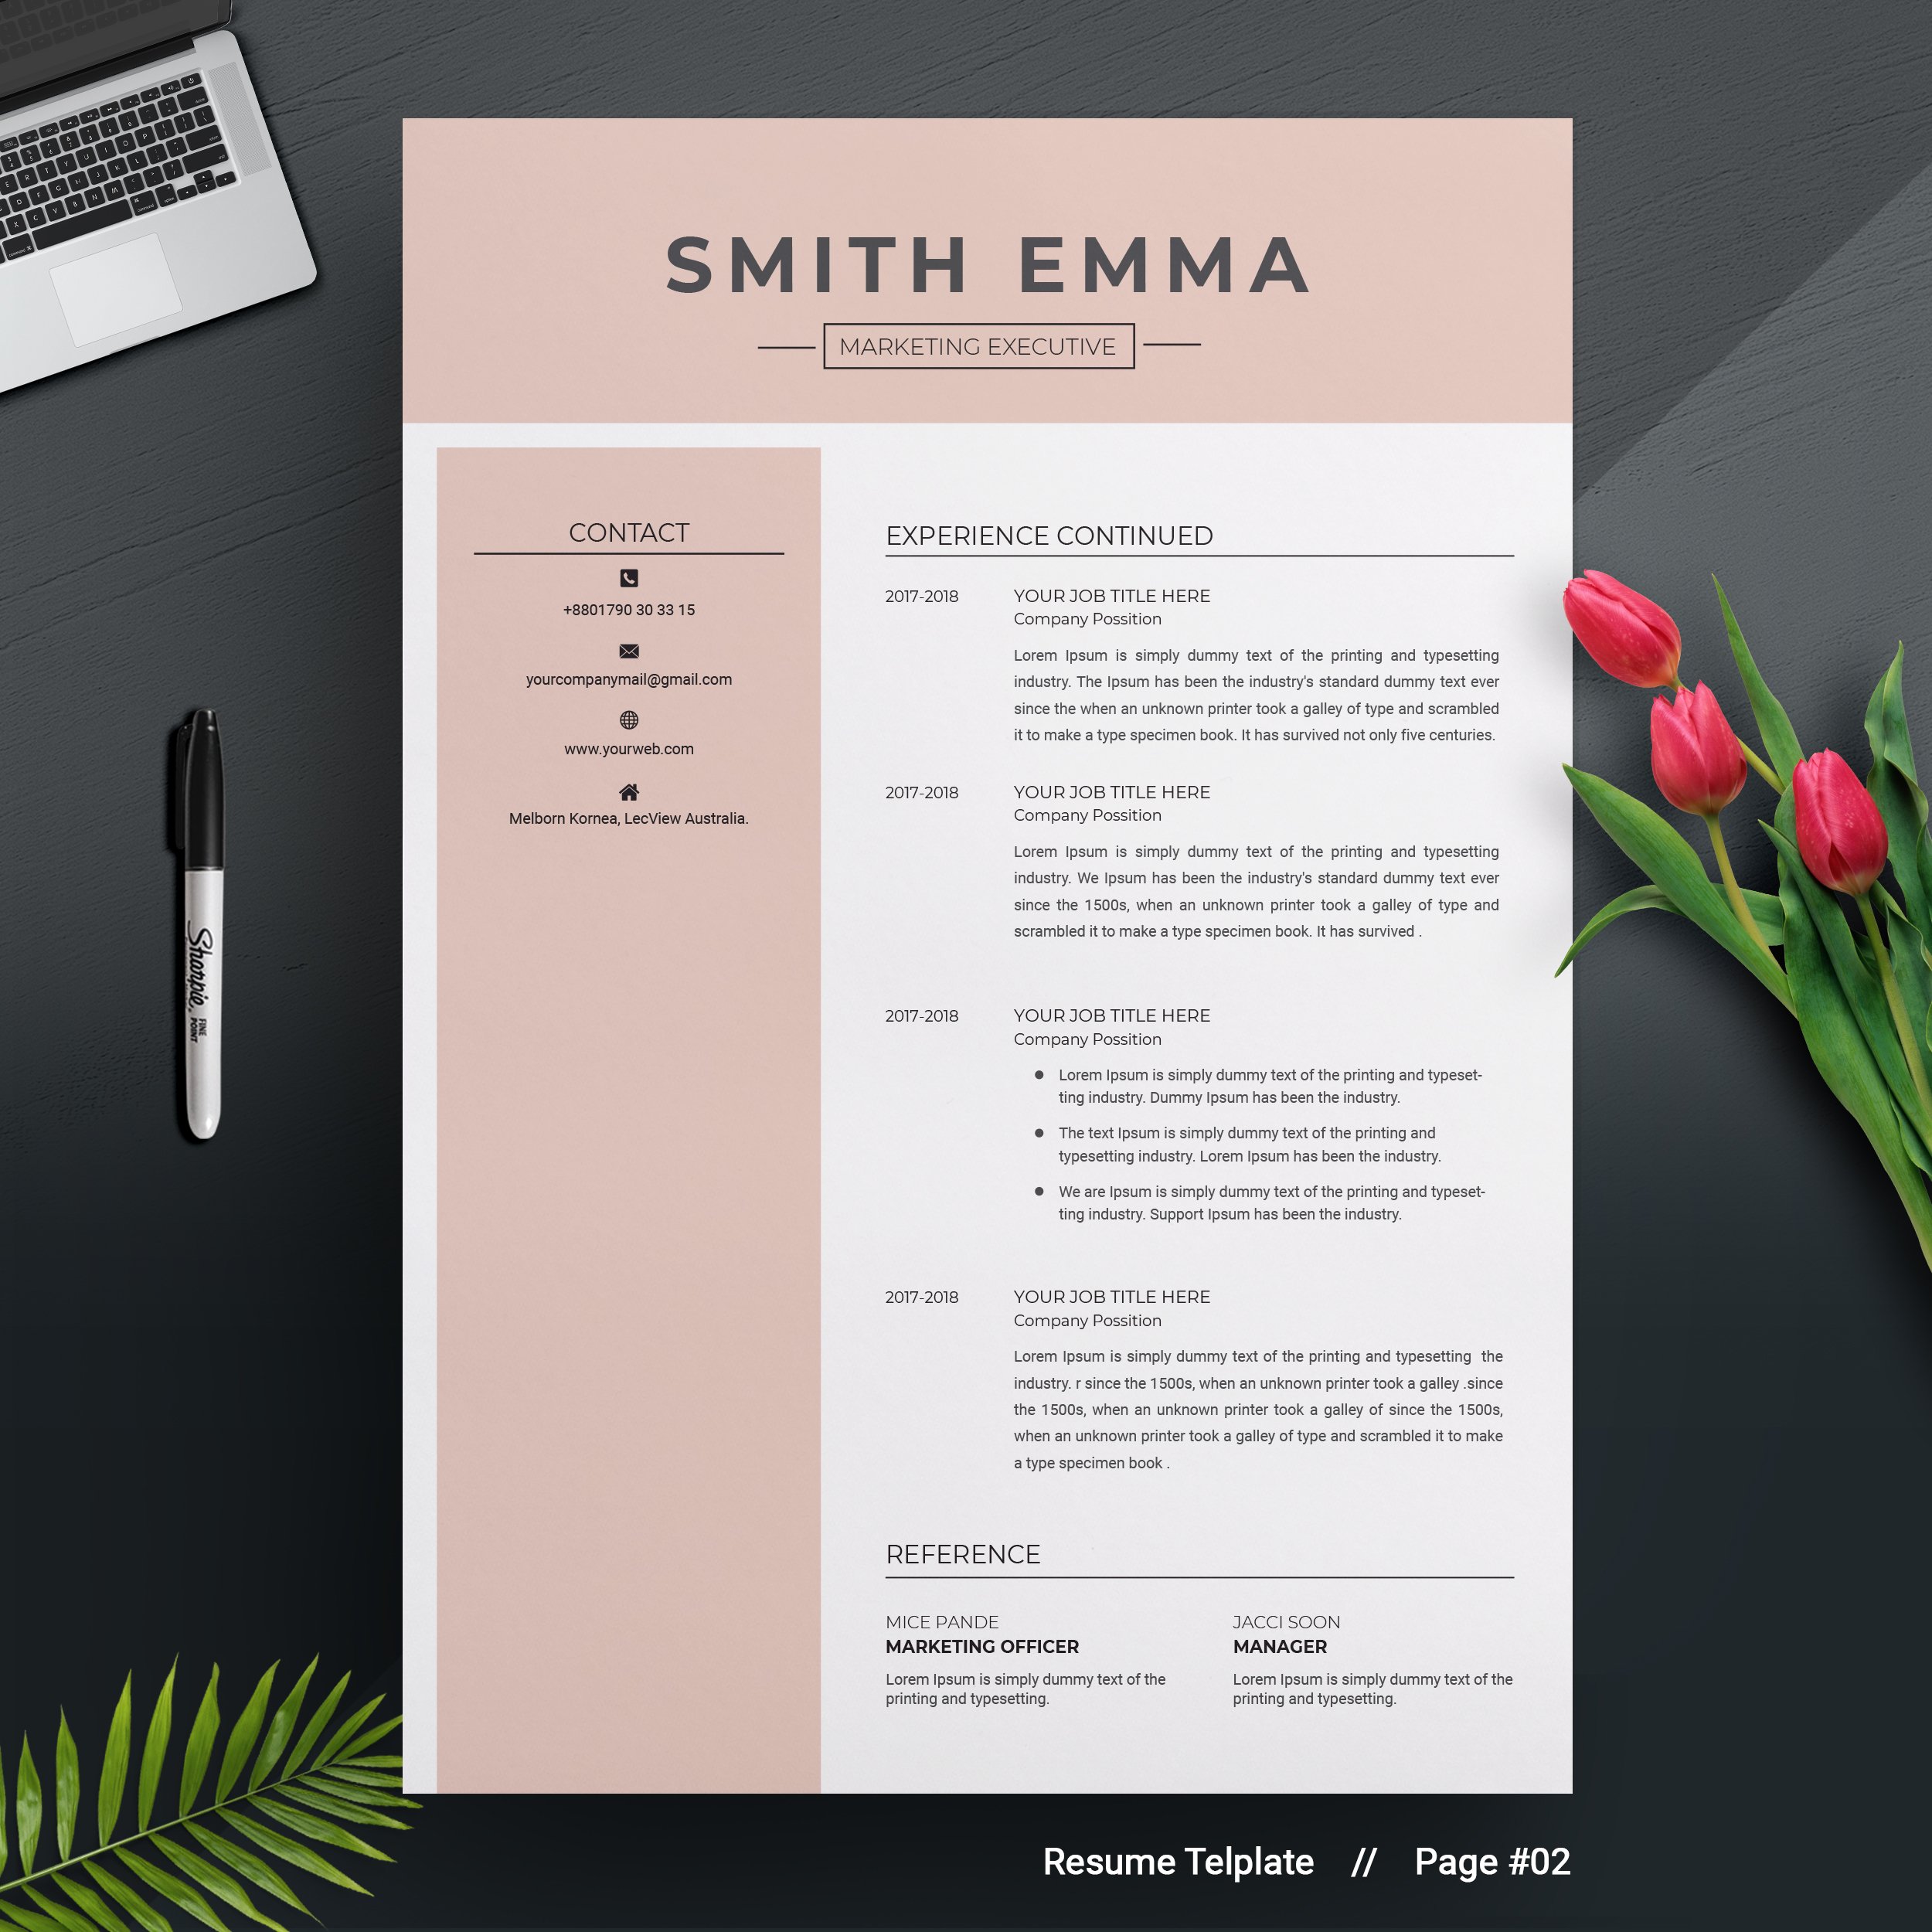 04 free resume page no 02 design template 699